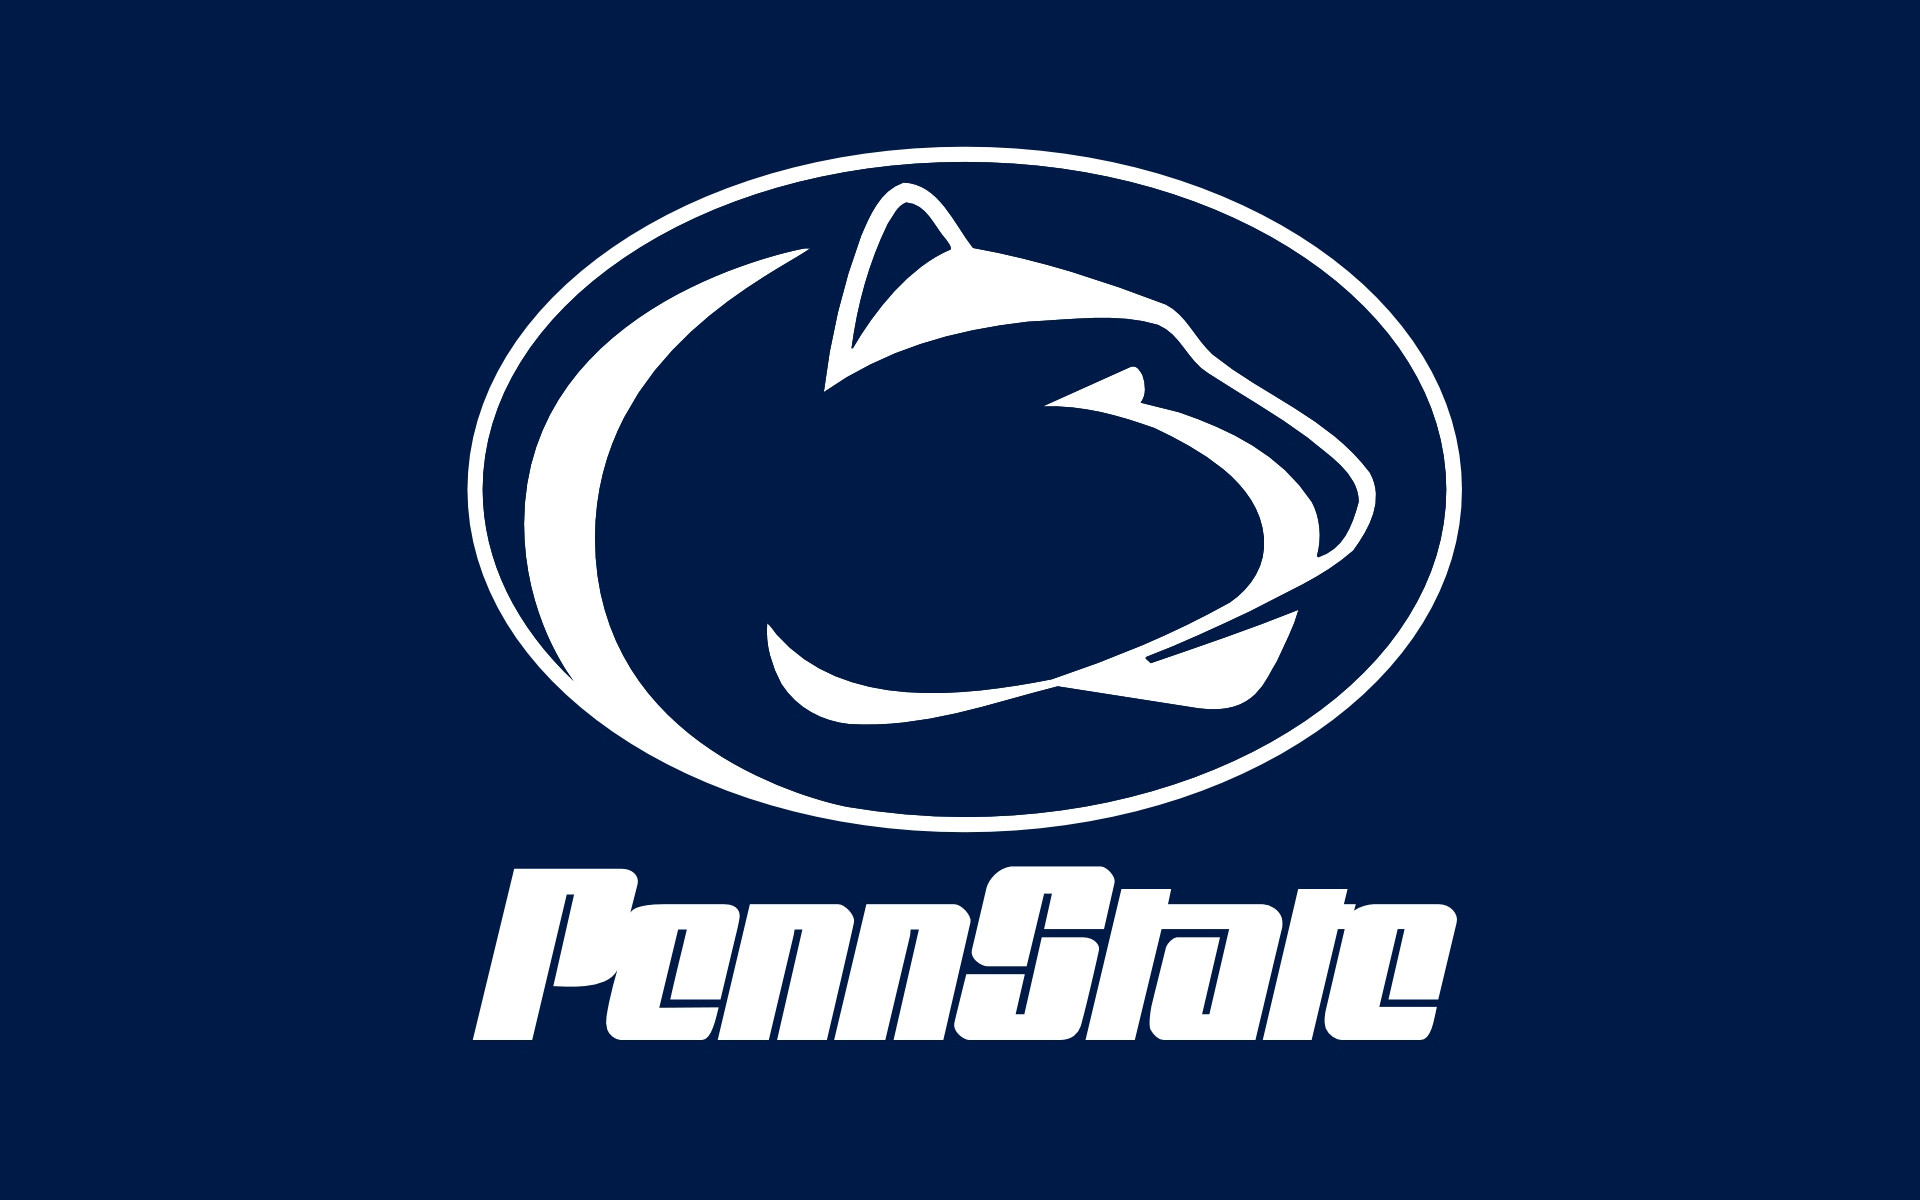 penn state photoshop download